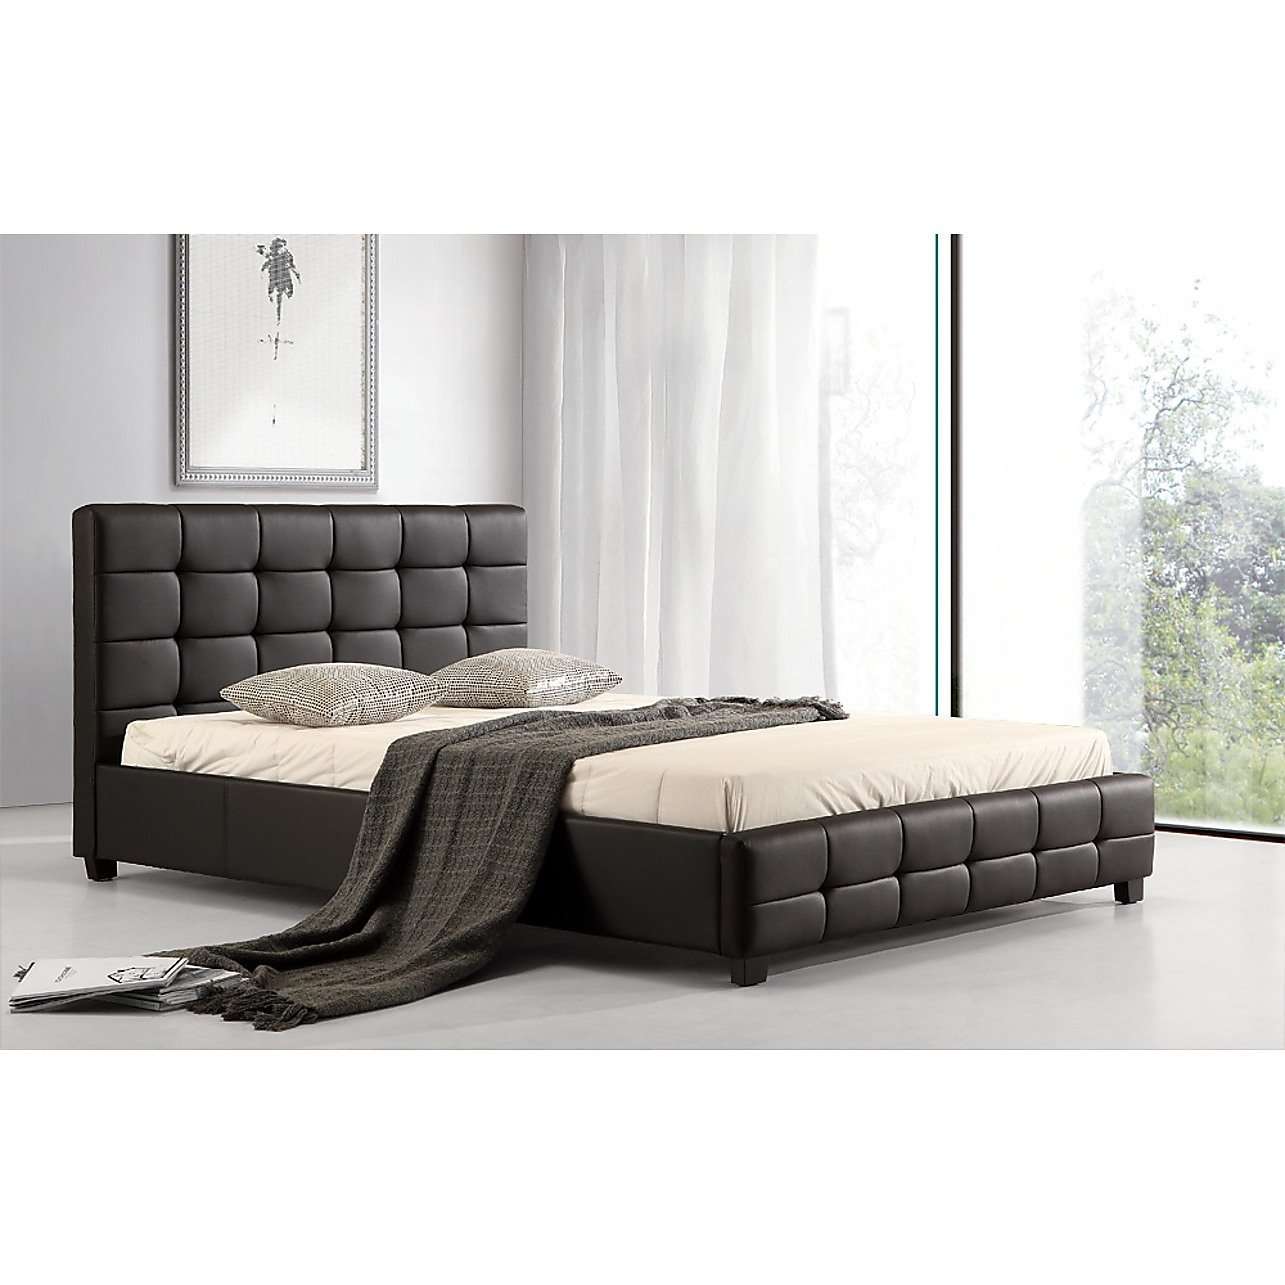 PU Leather Deluxe Bed Frame - 3 Colours